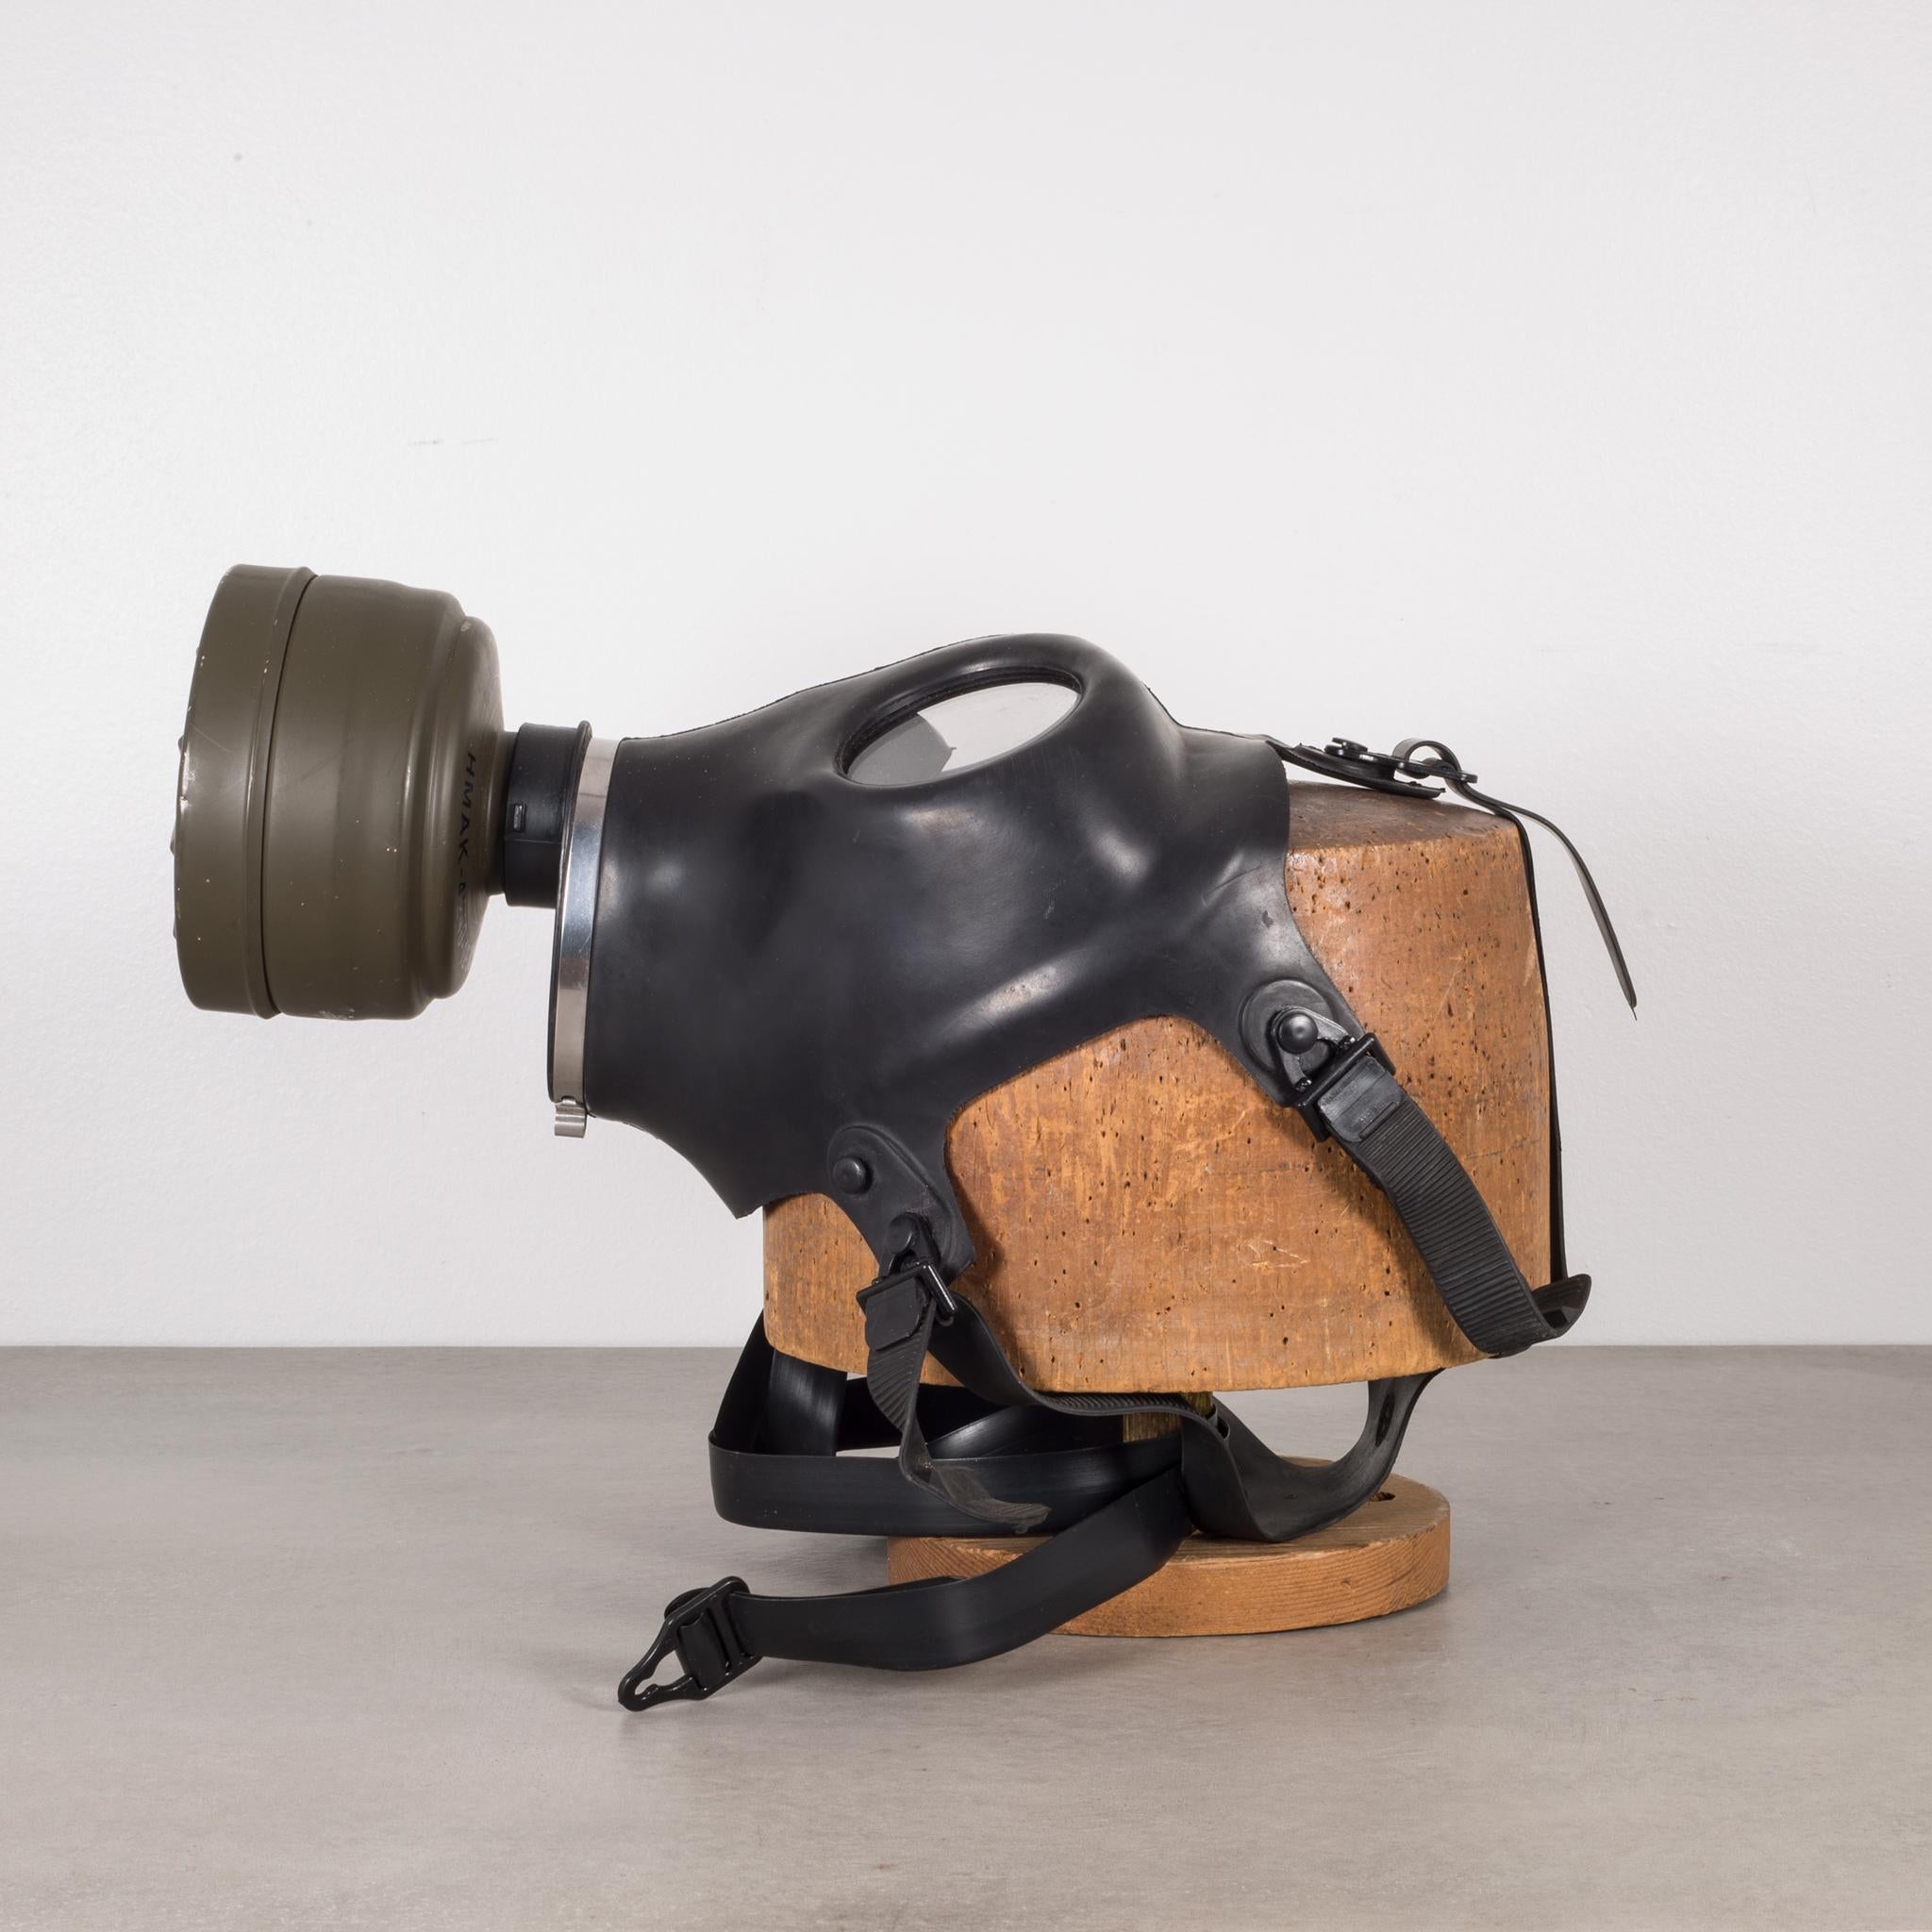 About

This is an original rubber and metal U.S. military gas mask. This piece has retained its original finish. (Wooden hat mold sold separately on this site.)

Creator: U.S. Military
Date of manufacture: circa 1970s
Materials and techniques: